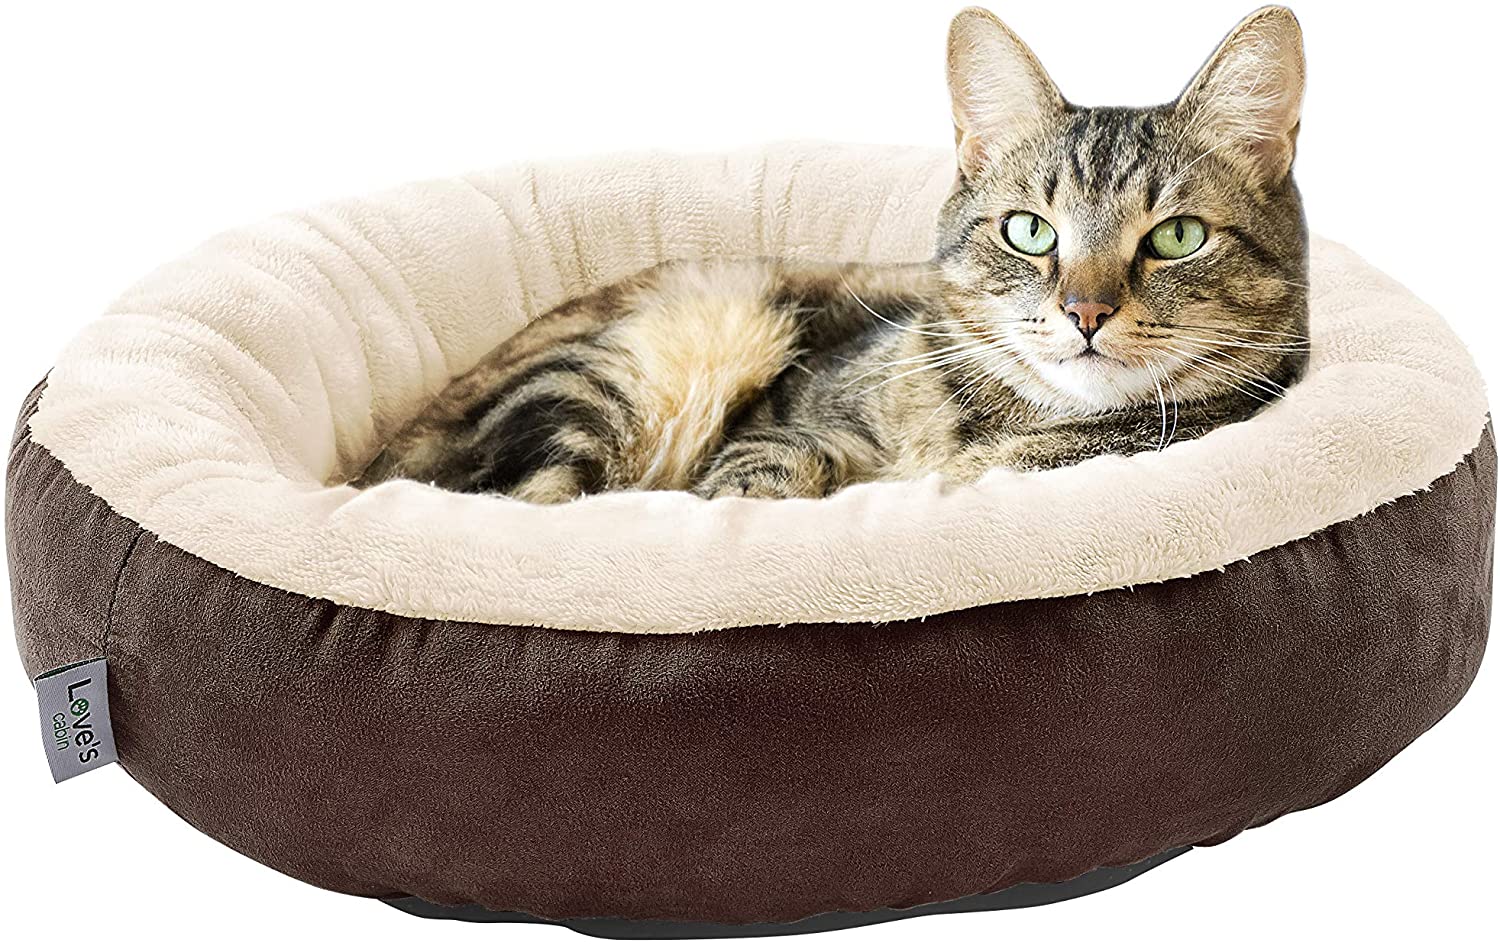 Loves-cabin-Round-Donut-Cat-Cushion-Bed